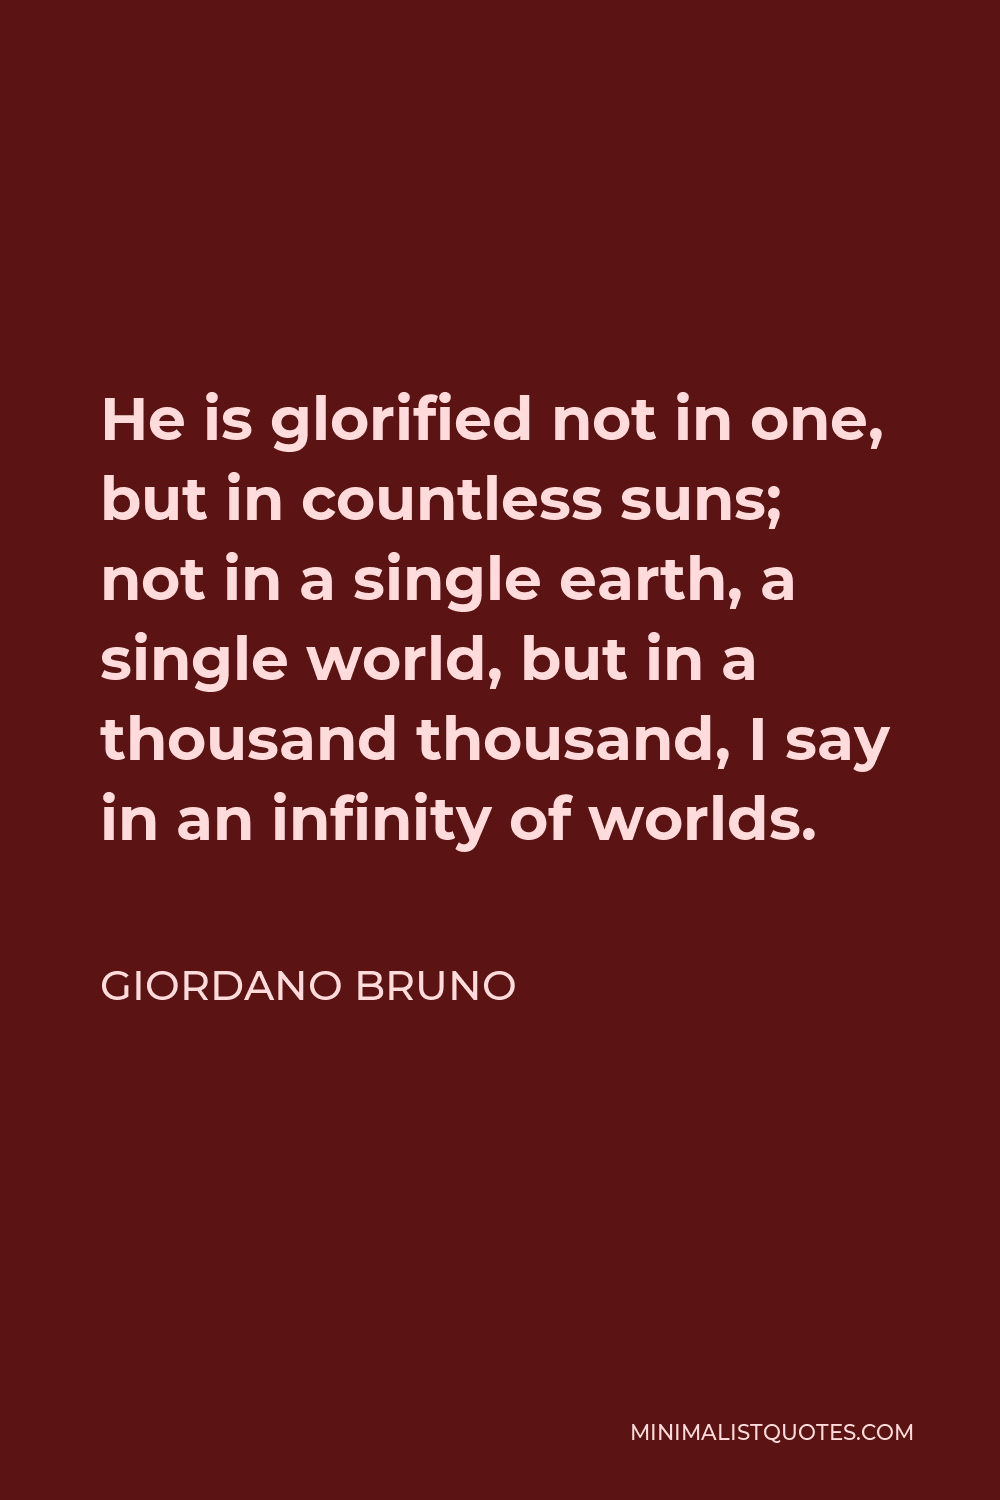 Giordano Bruno Quote - He is glorified not in one, but in countless suns; not in a single earth, a single world, but in a thousand thousand, I say in an infinity of worlds.